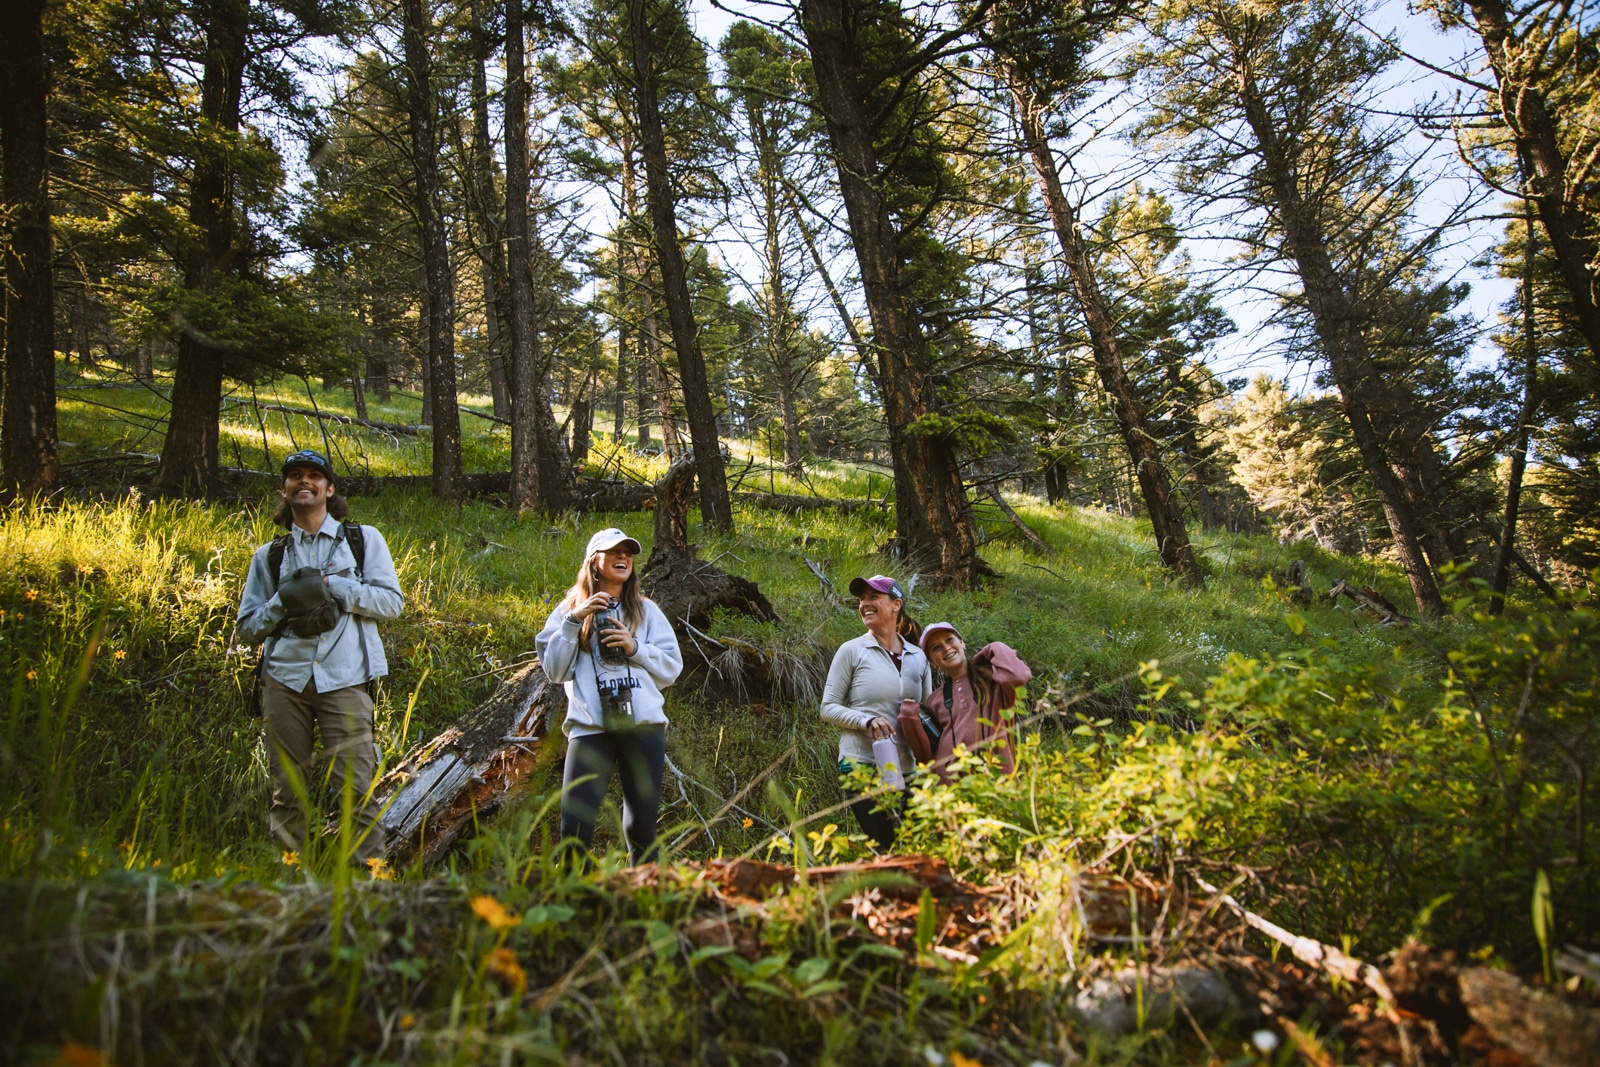 A guided hike from Upper Canyon Outfitters in Montana's natural beauty.